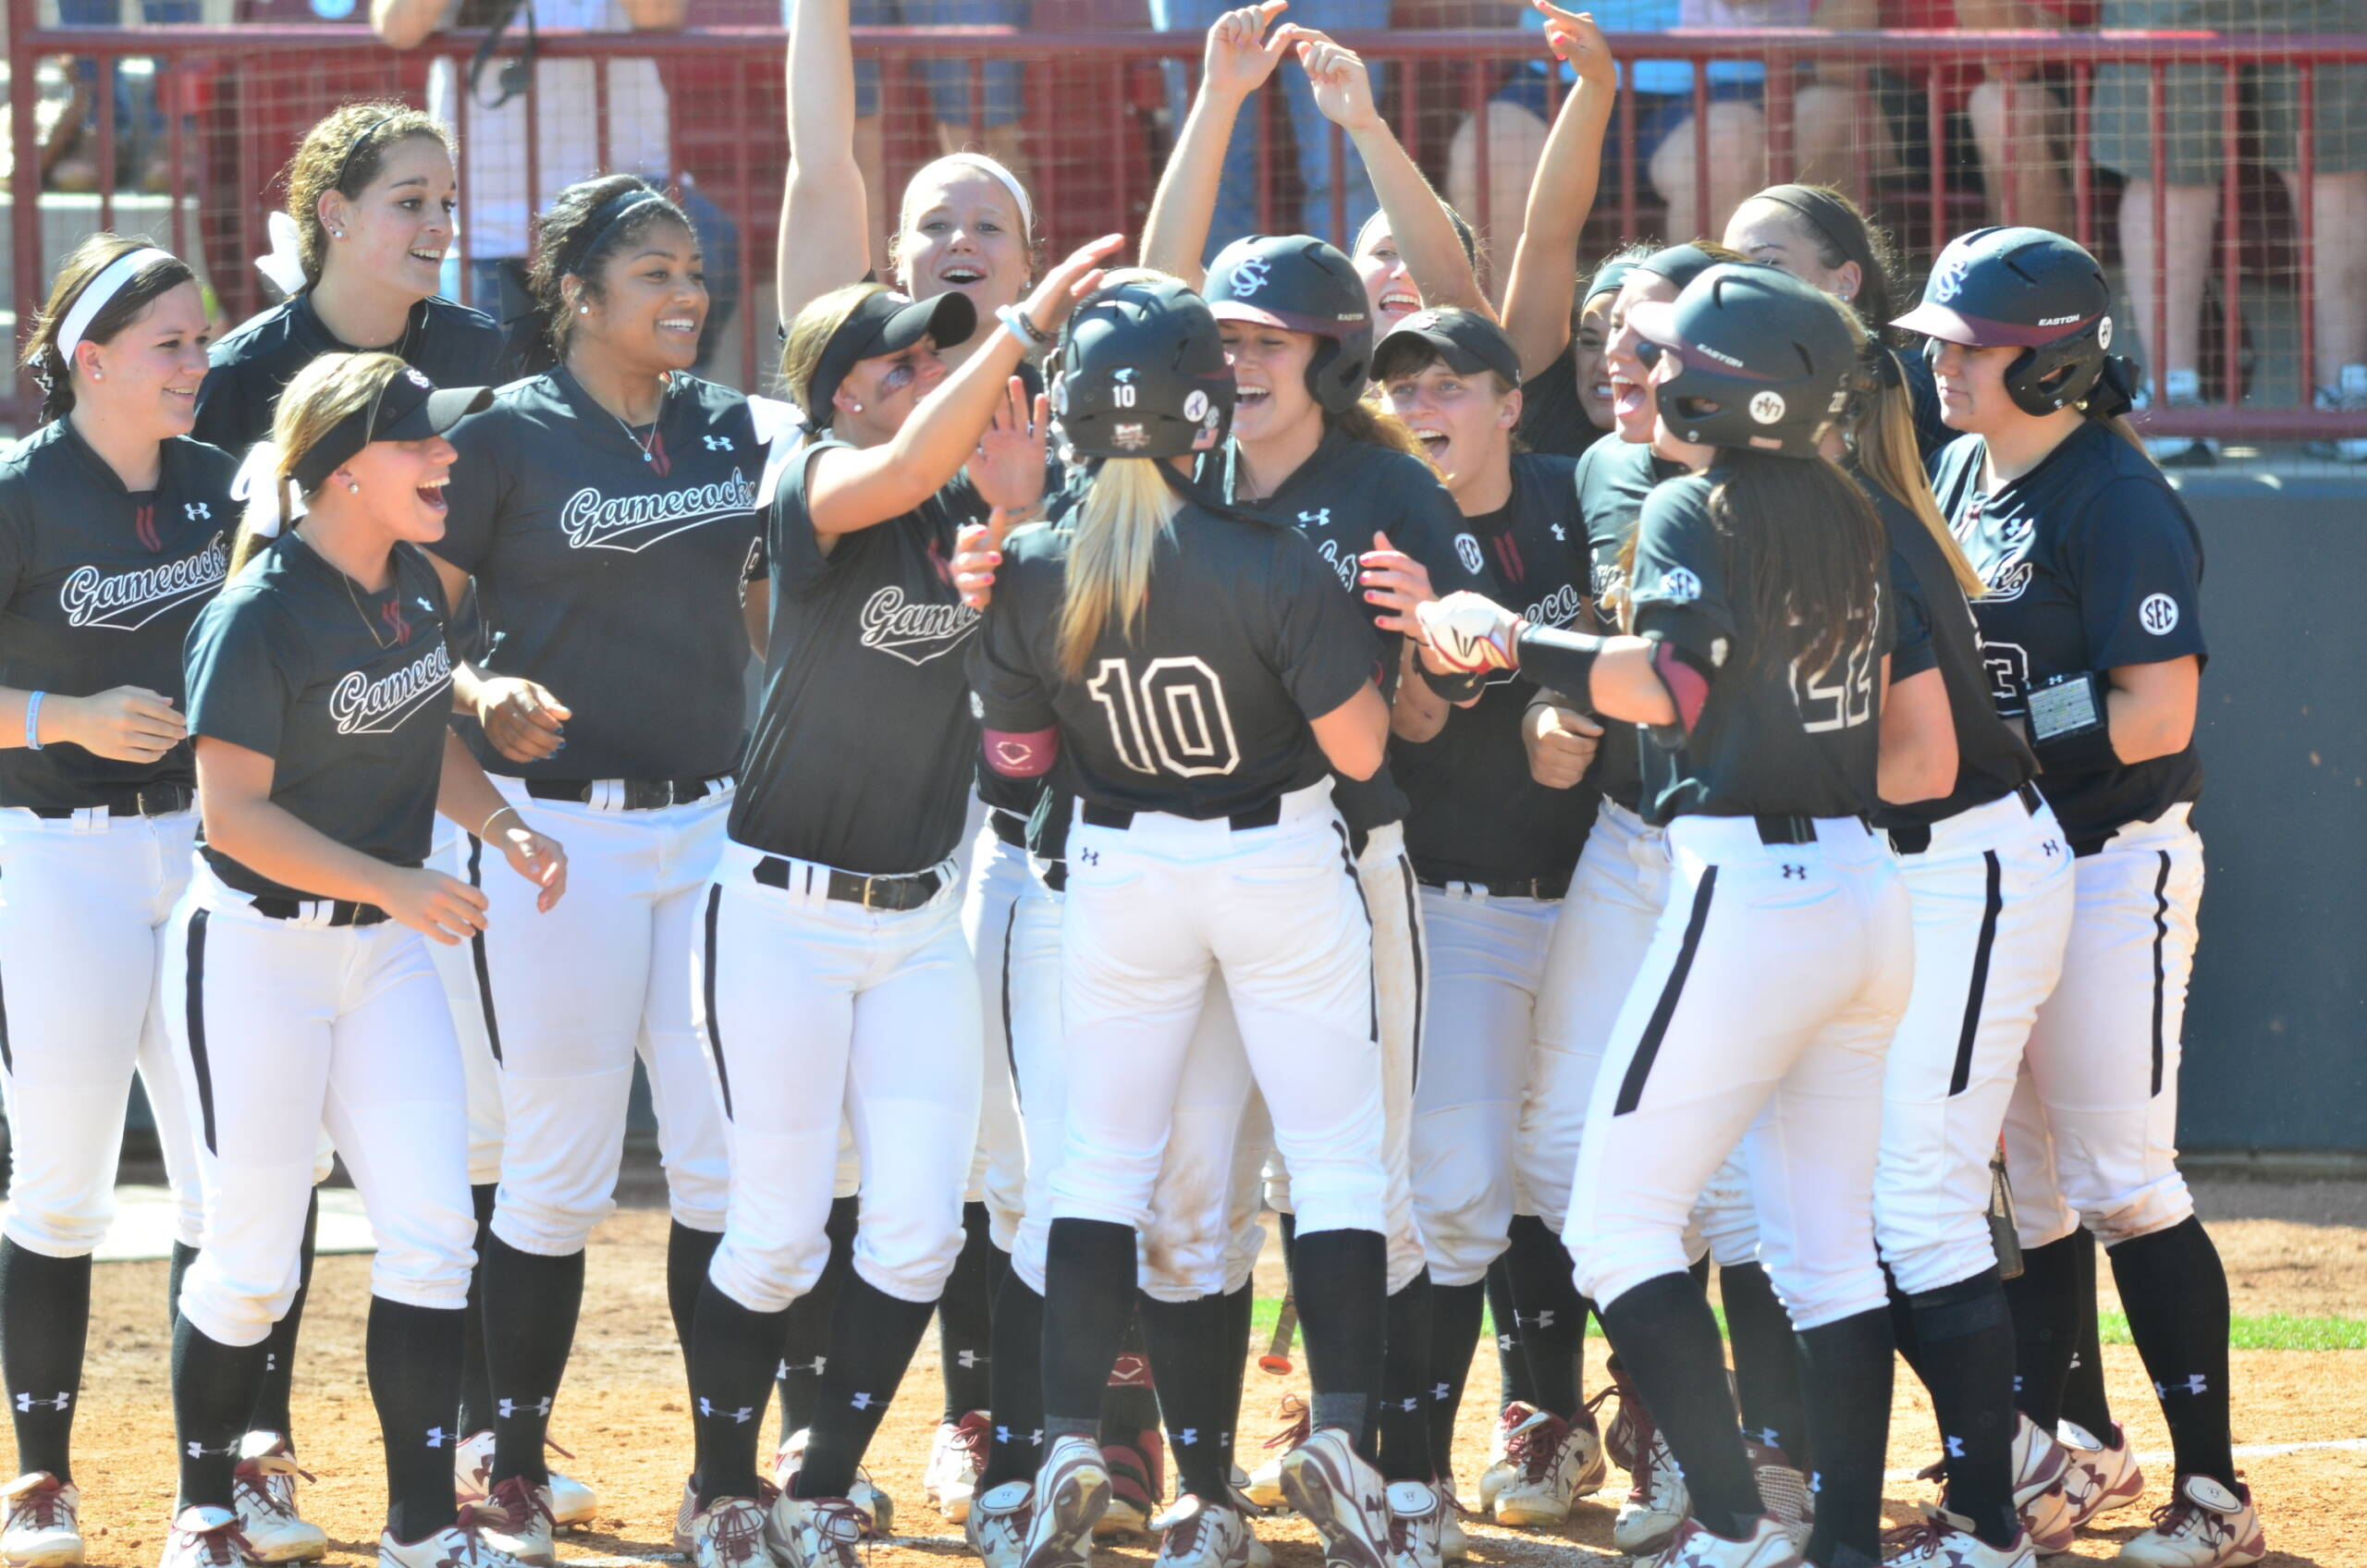 2014 Gamecock Softball Year In Review